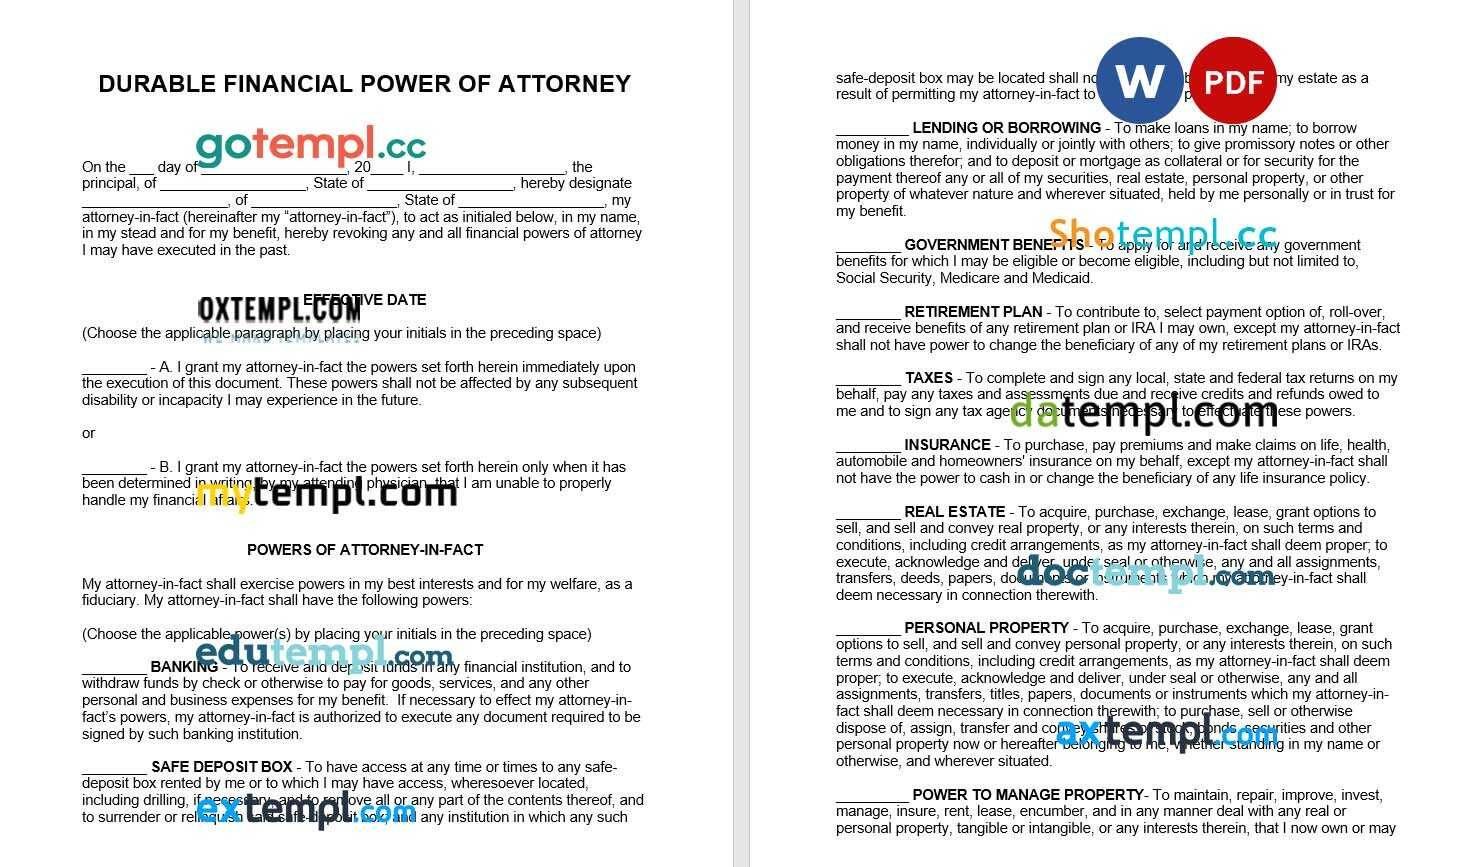 Durable Financial Power of Attorney Form example, fully editable